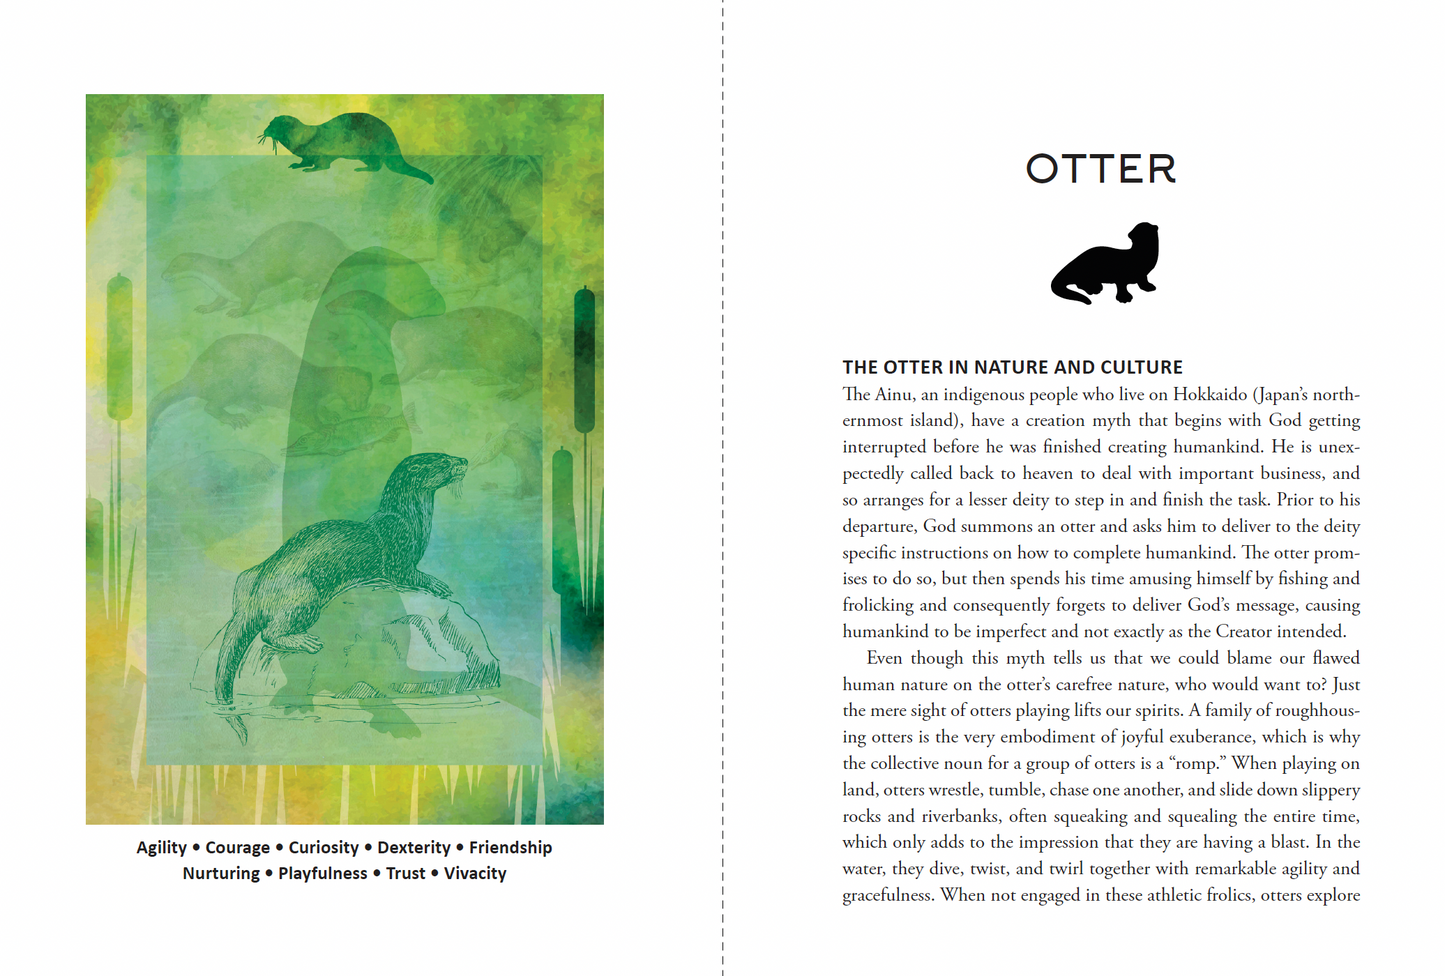 Your Inner Zoo: A Guide to the Meaning of Animals & the Insights They Offer Us